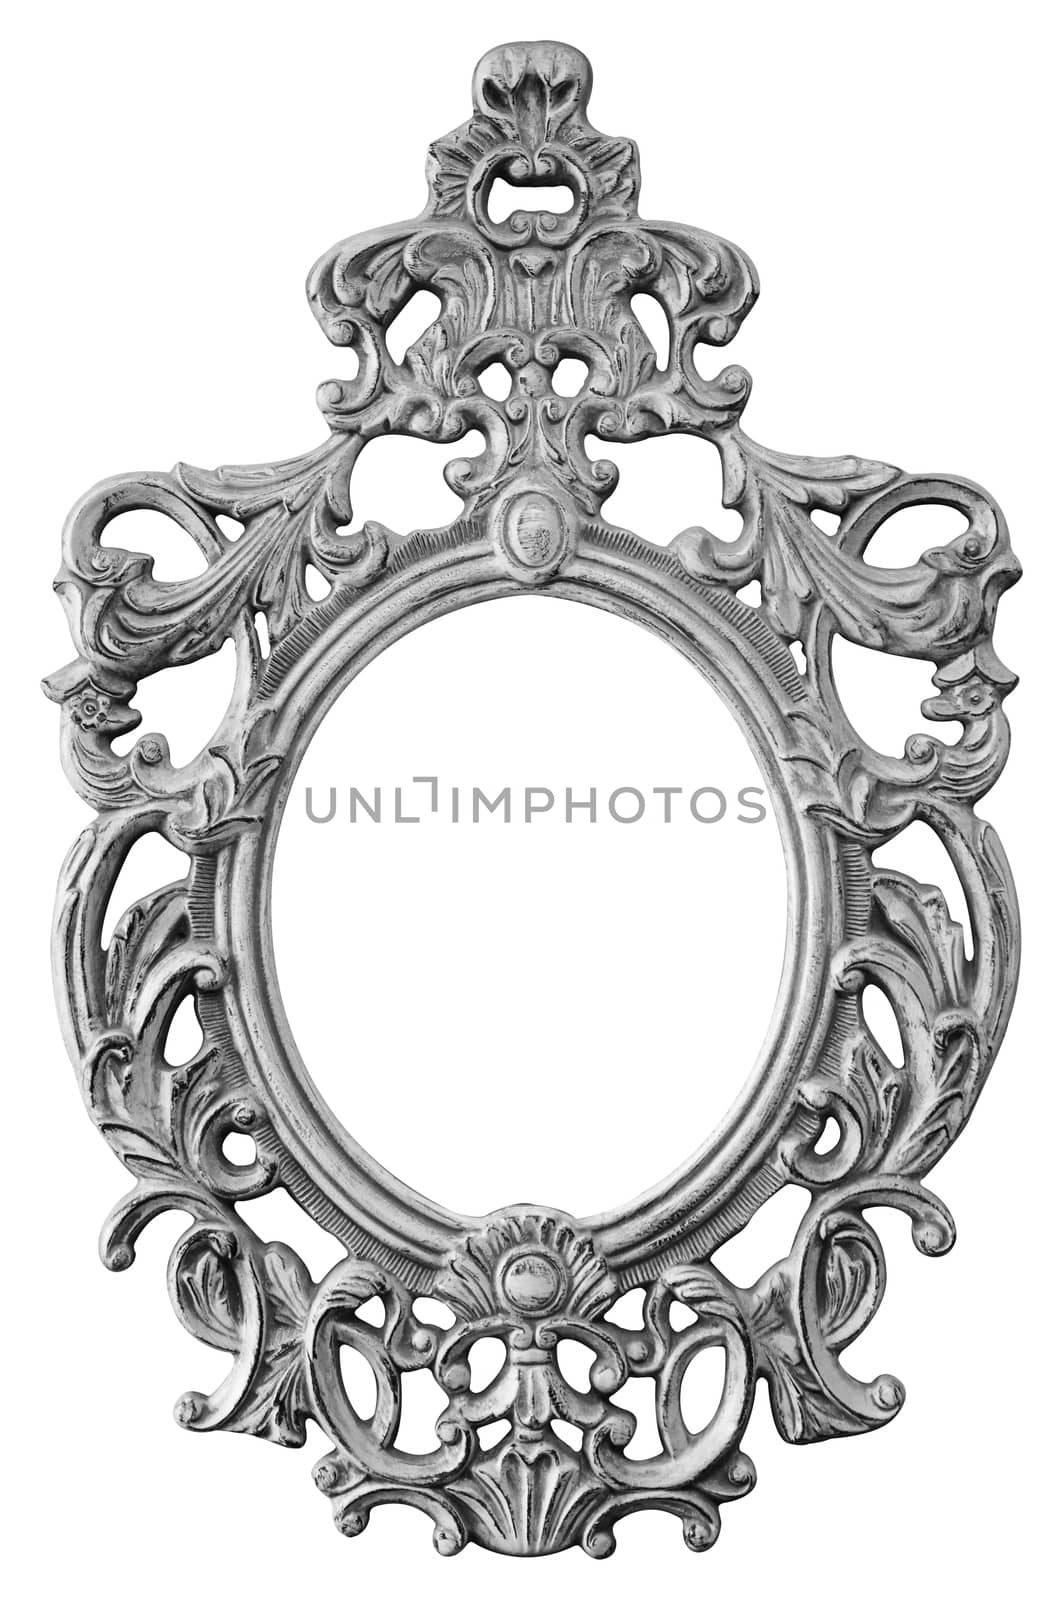 Silver ornate oval frame isolated on white background